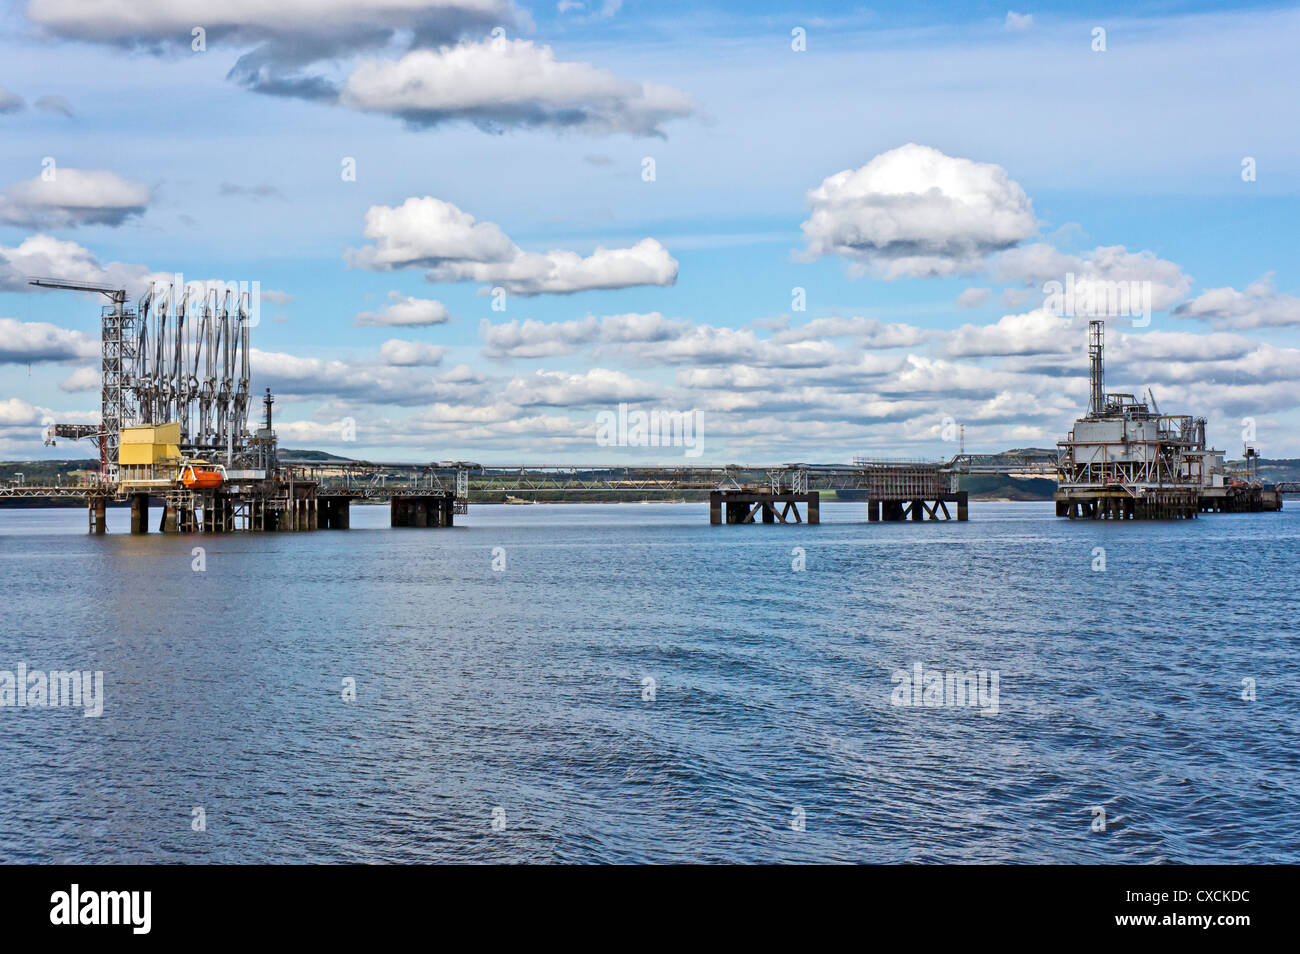 Hound Point oil terminal in the Firth of Forth Scotland as seen from the south west. Stock Photo